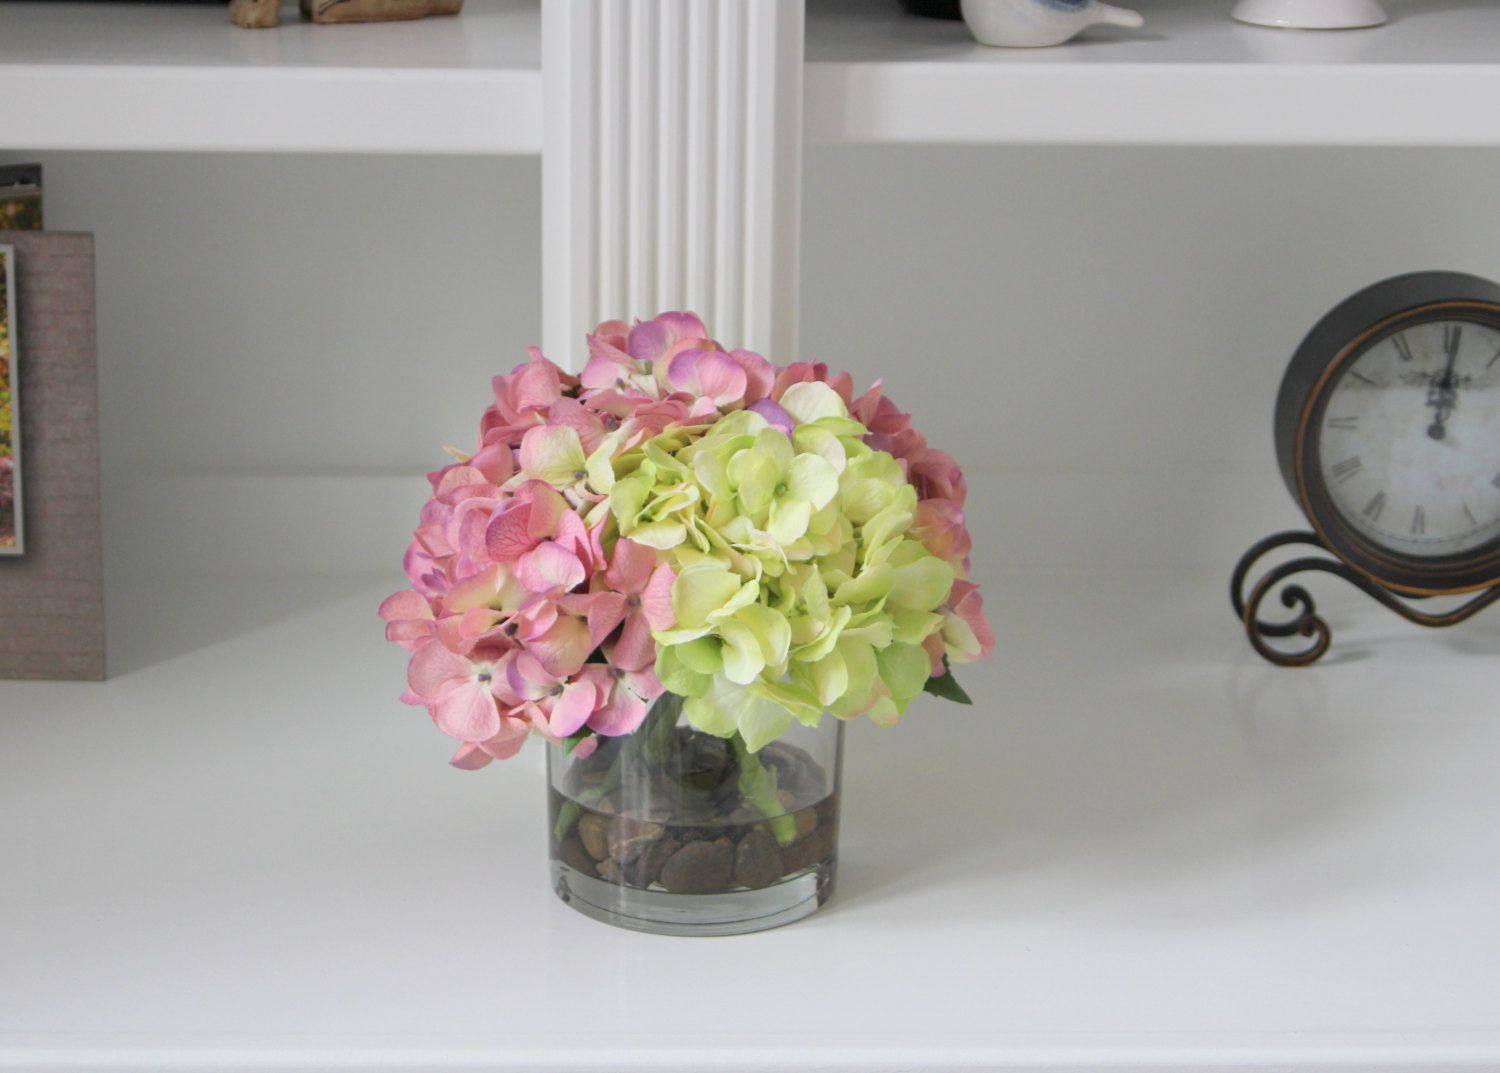 21 Unique Vase with Hydrangeas 2024 free download vase with hydrangeas of summer sale silk floral arrangement summer centerpiece all year inside all year round hydrangeas in glass vase with faux water by simplystems on etsy https www etsy c